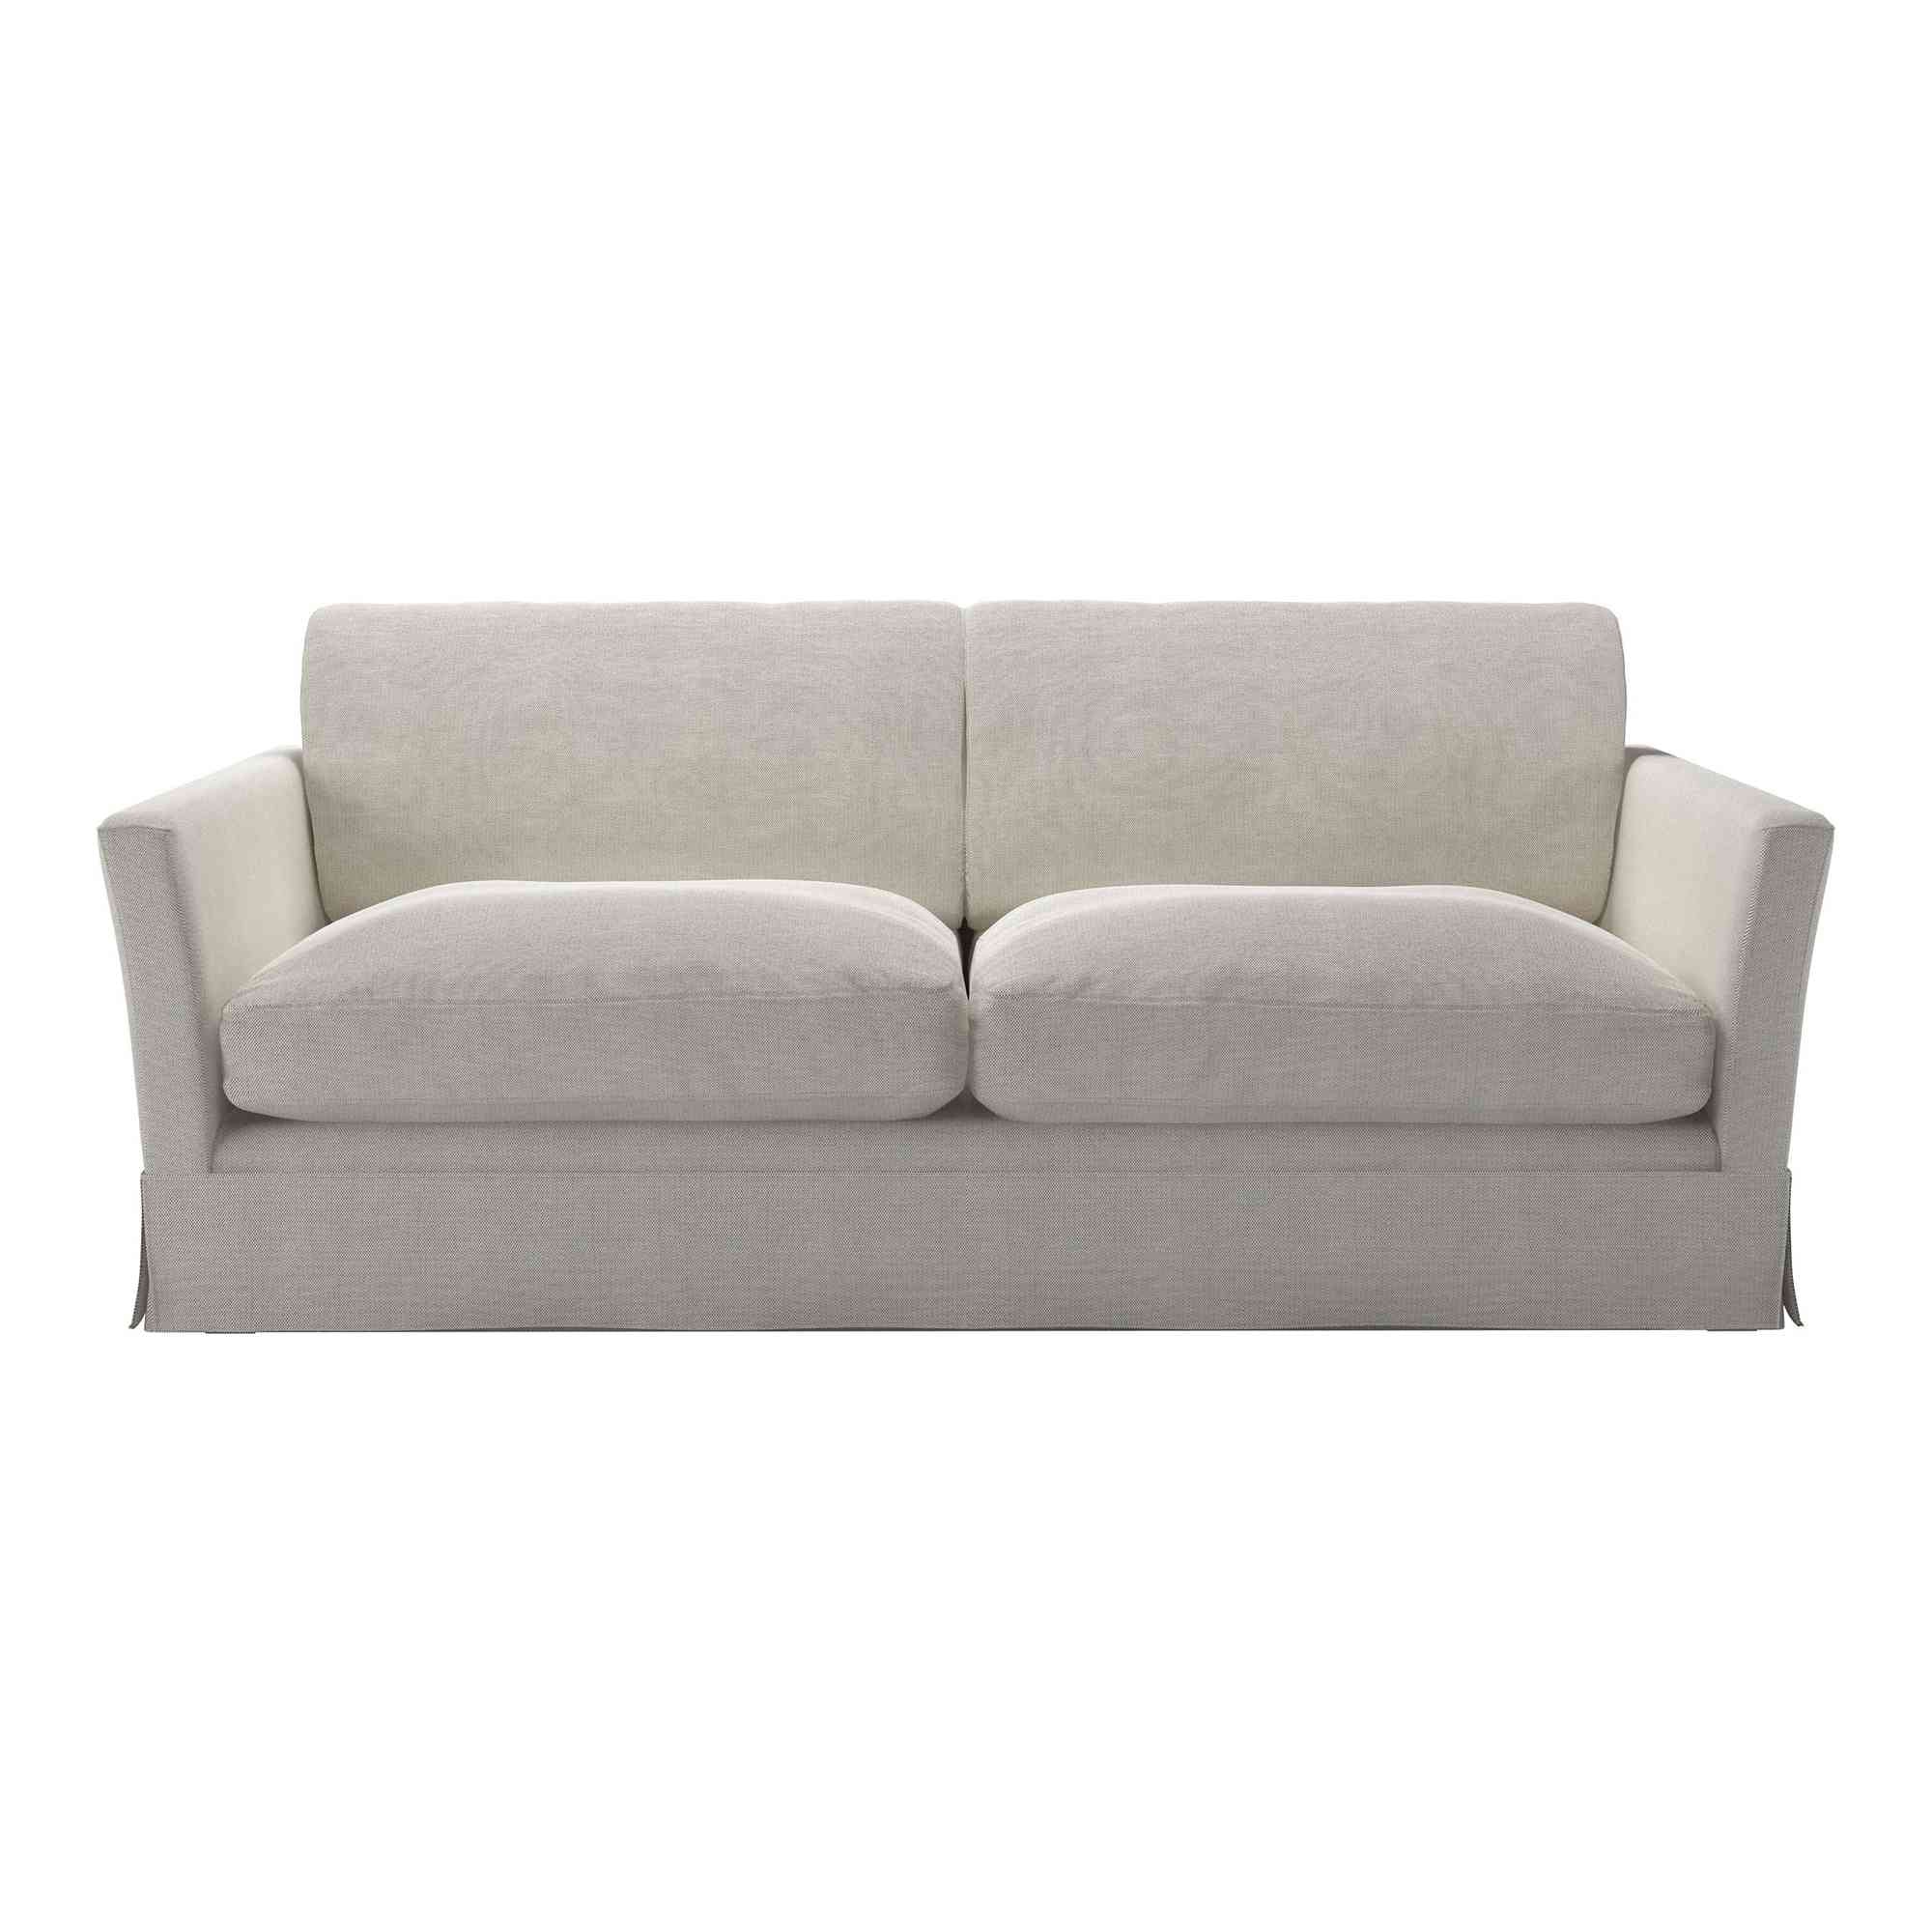 Otto Clay House Basket Weave Sofa - 3 Seater